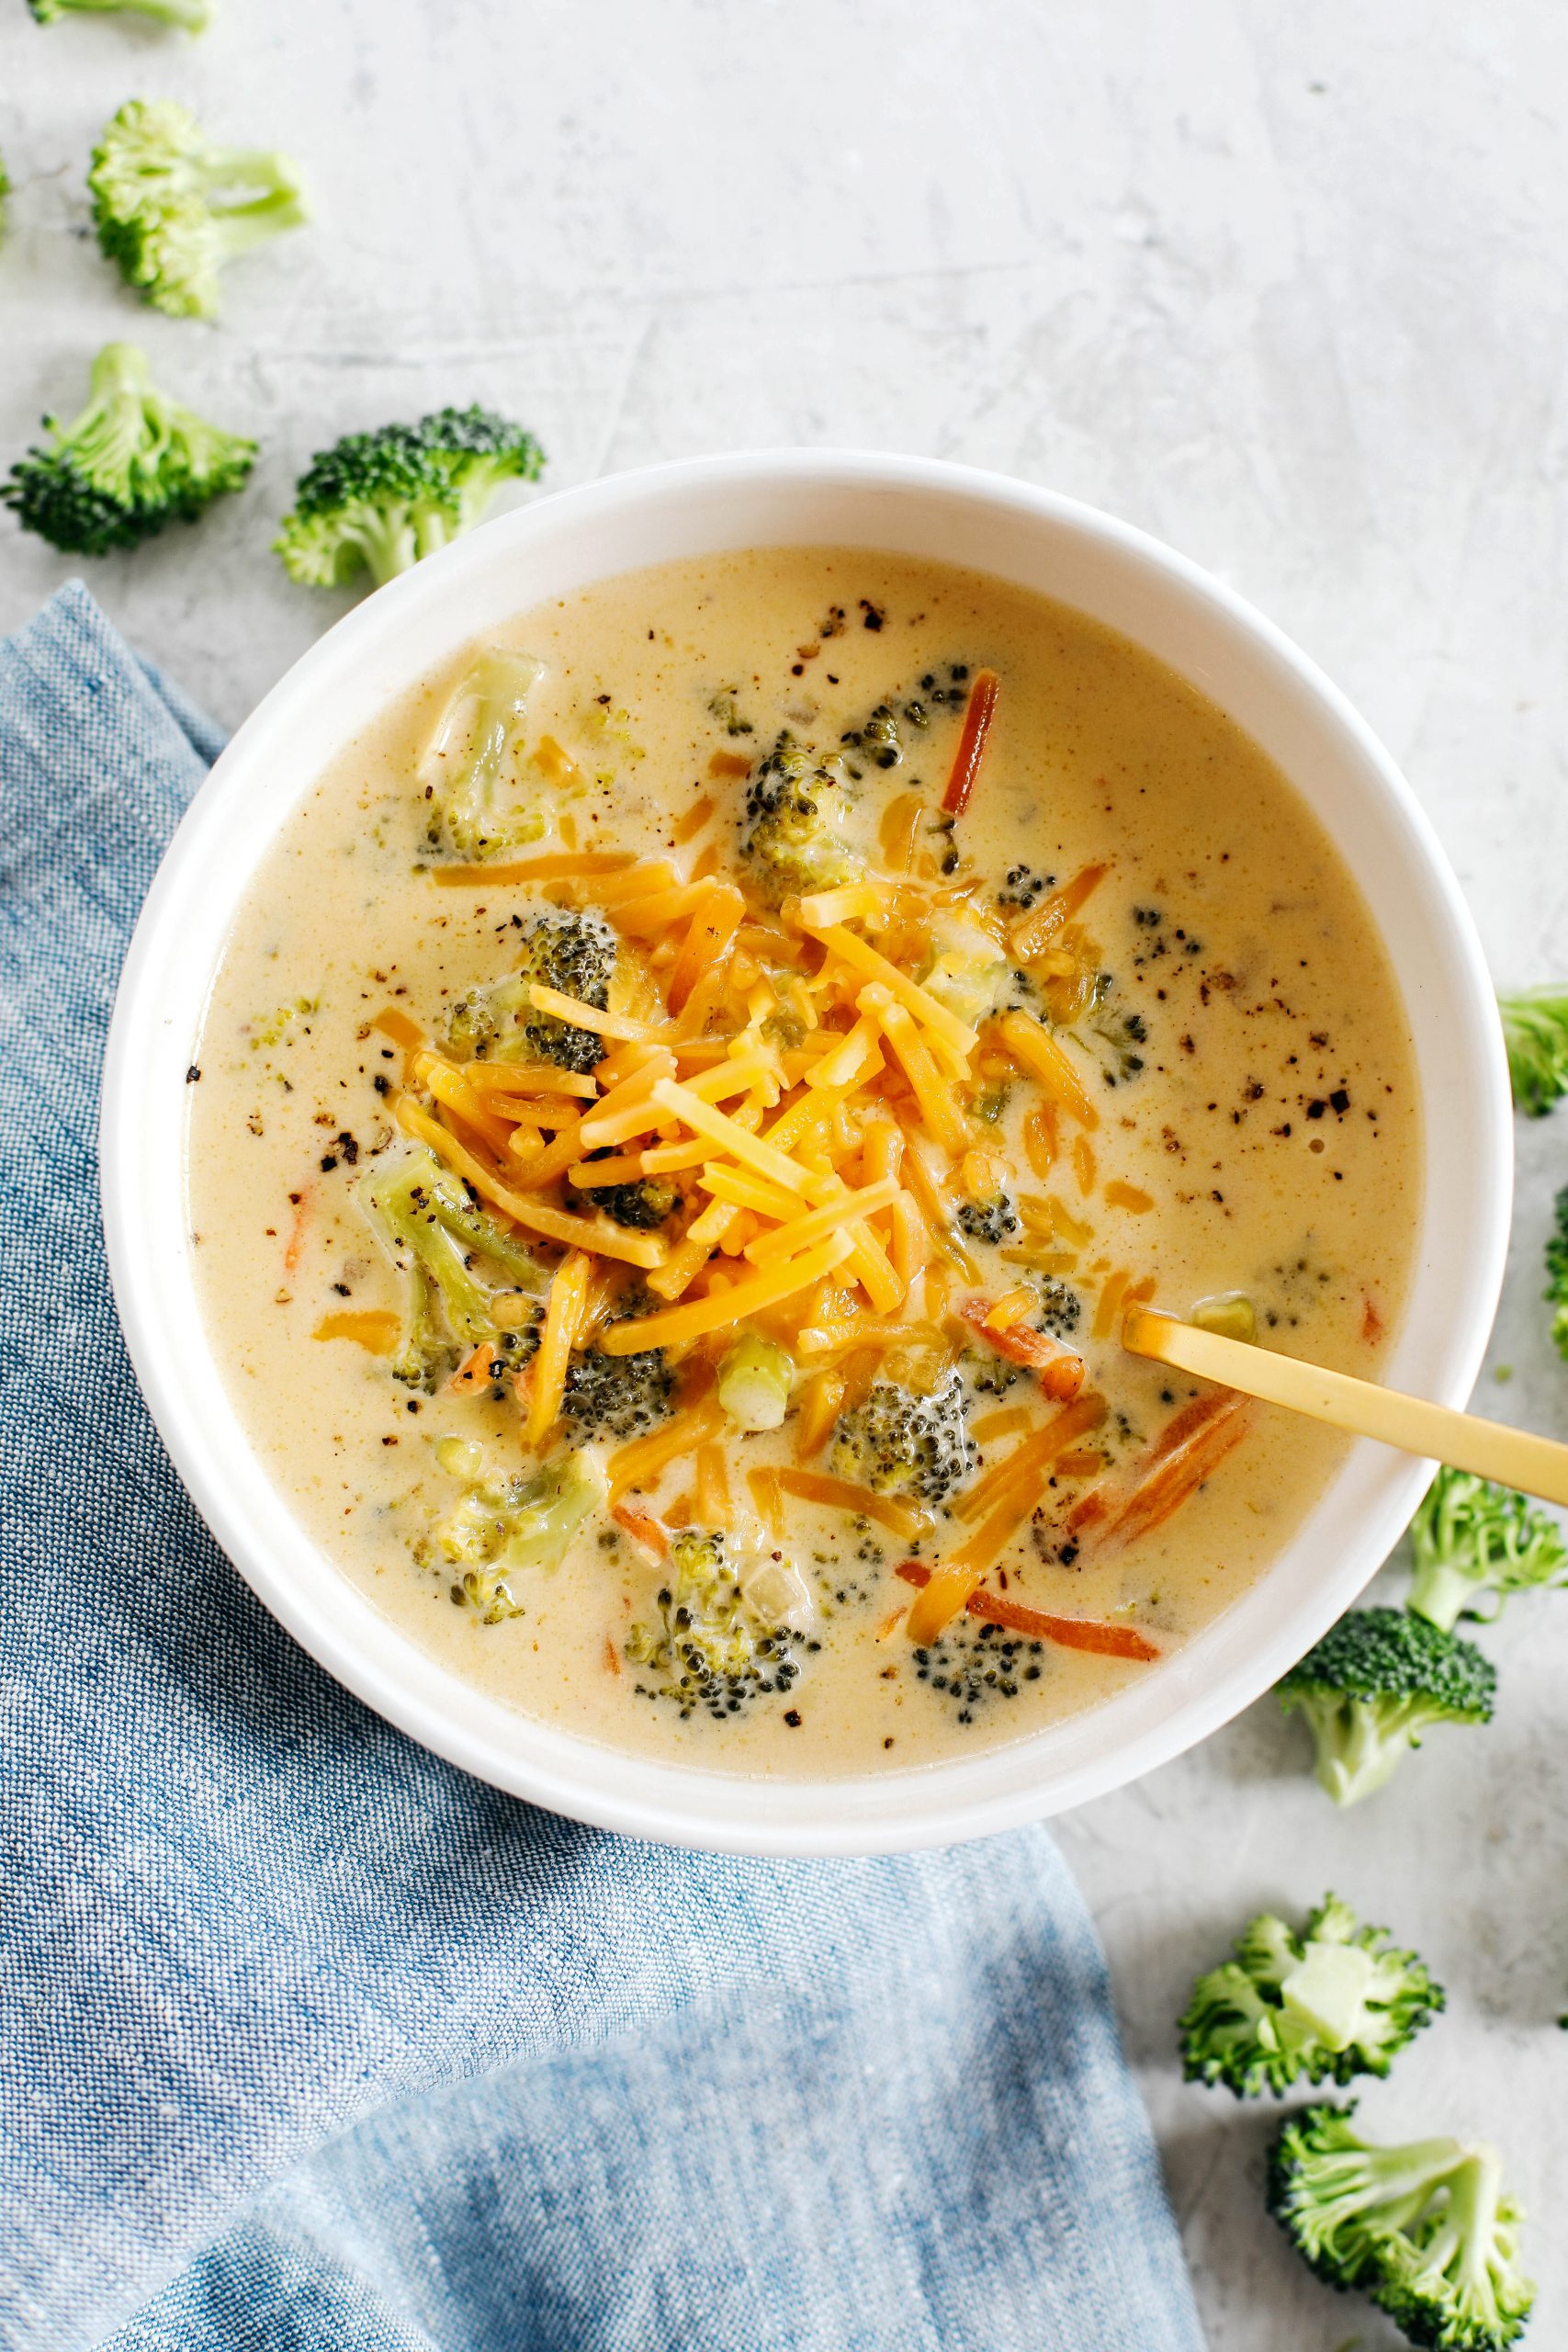 This Creamy Broccoli Cheddar Soup makes the perfect low carb comfort dish that is delicious, packed with veggies and made all in one pot in under 30 minutes!